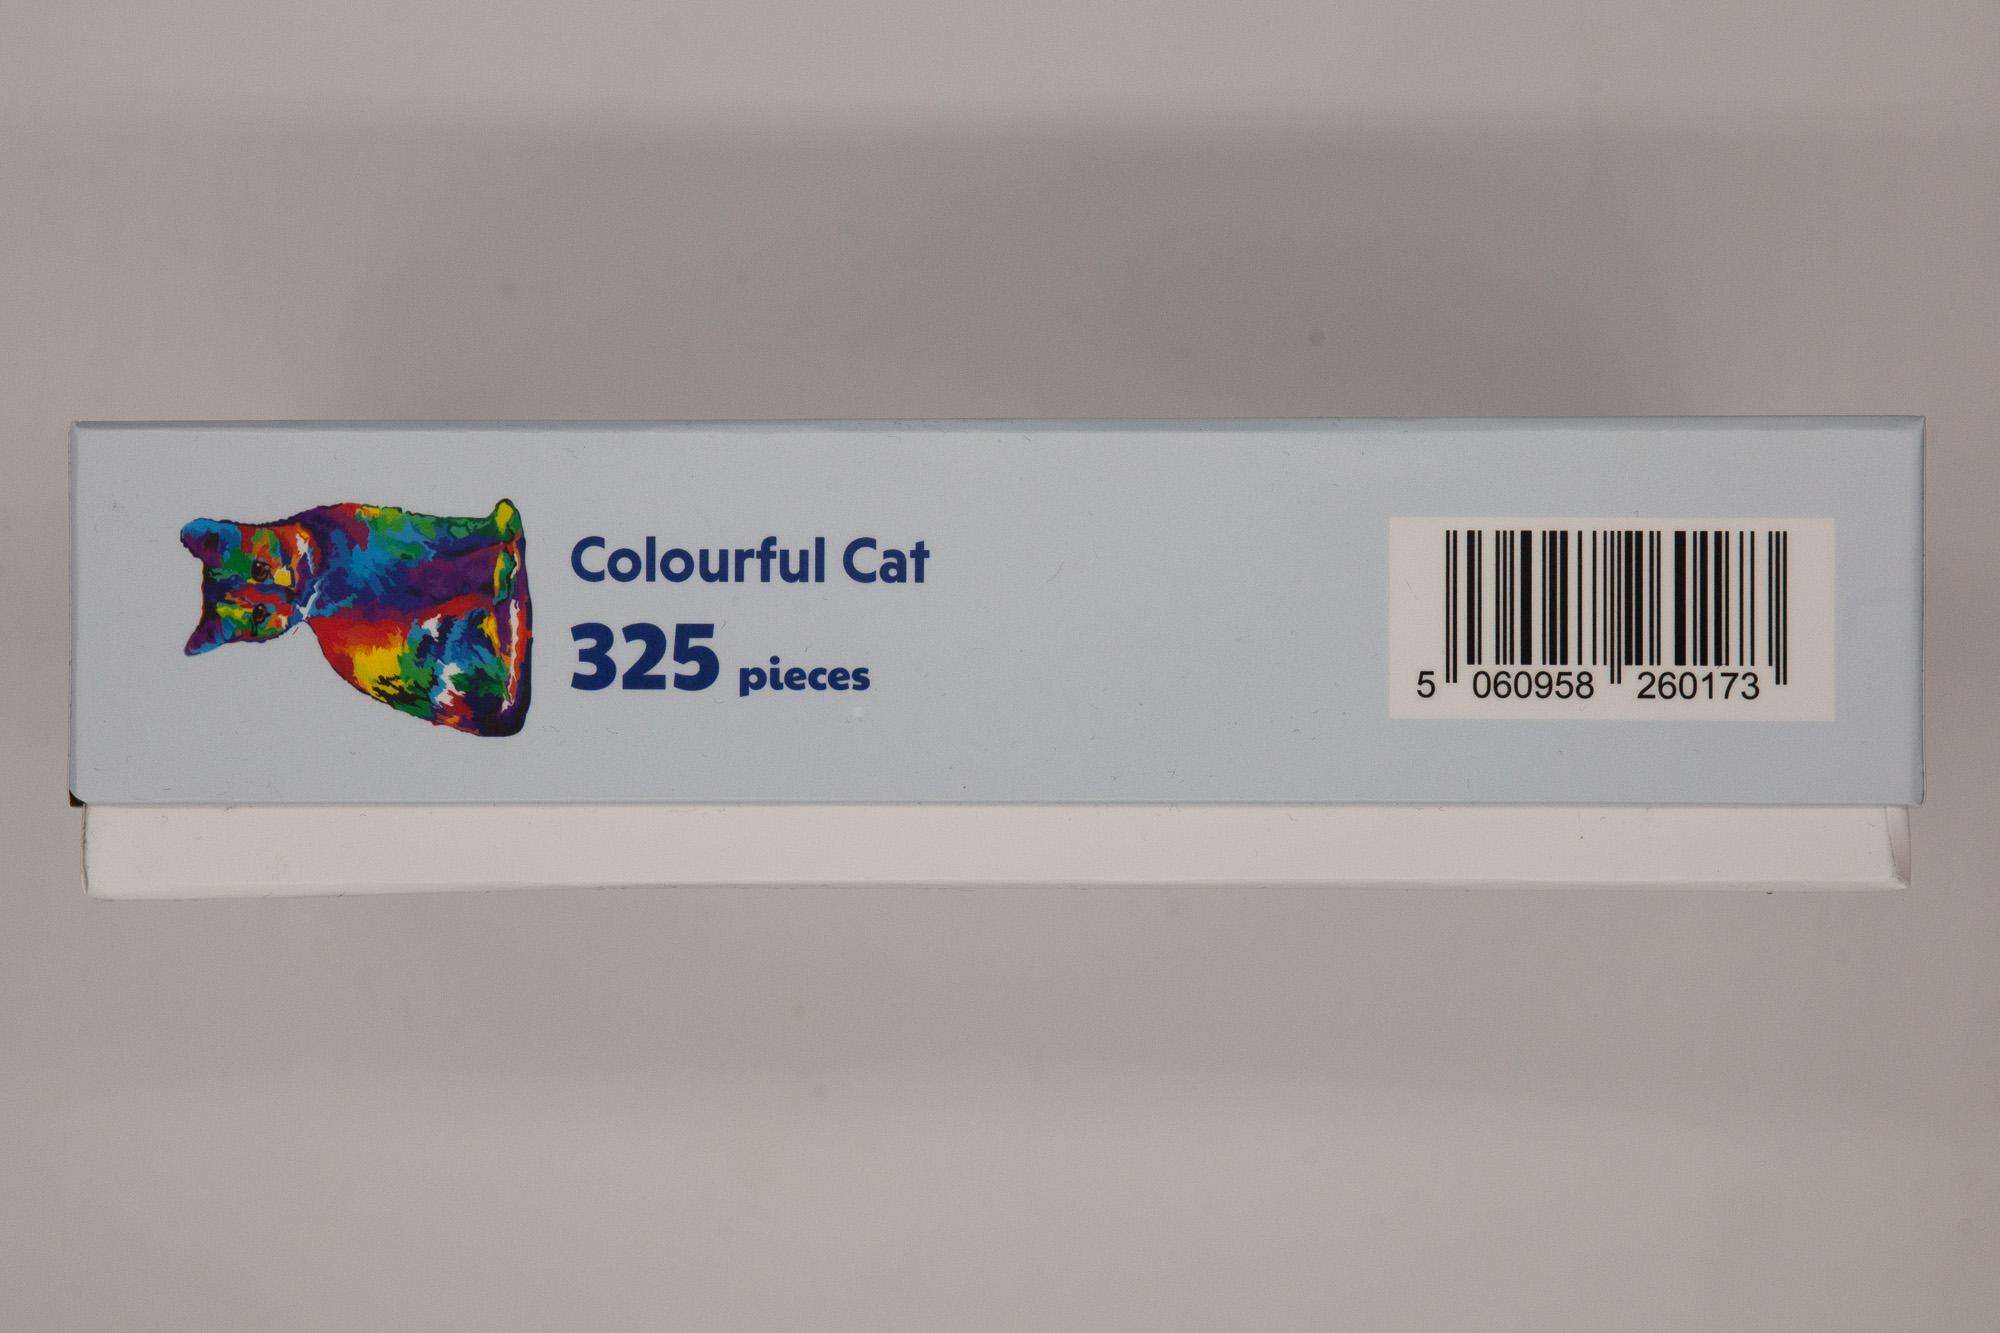 Colourful Cat wooden puzzle